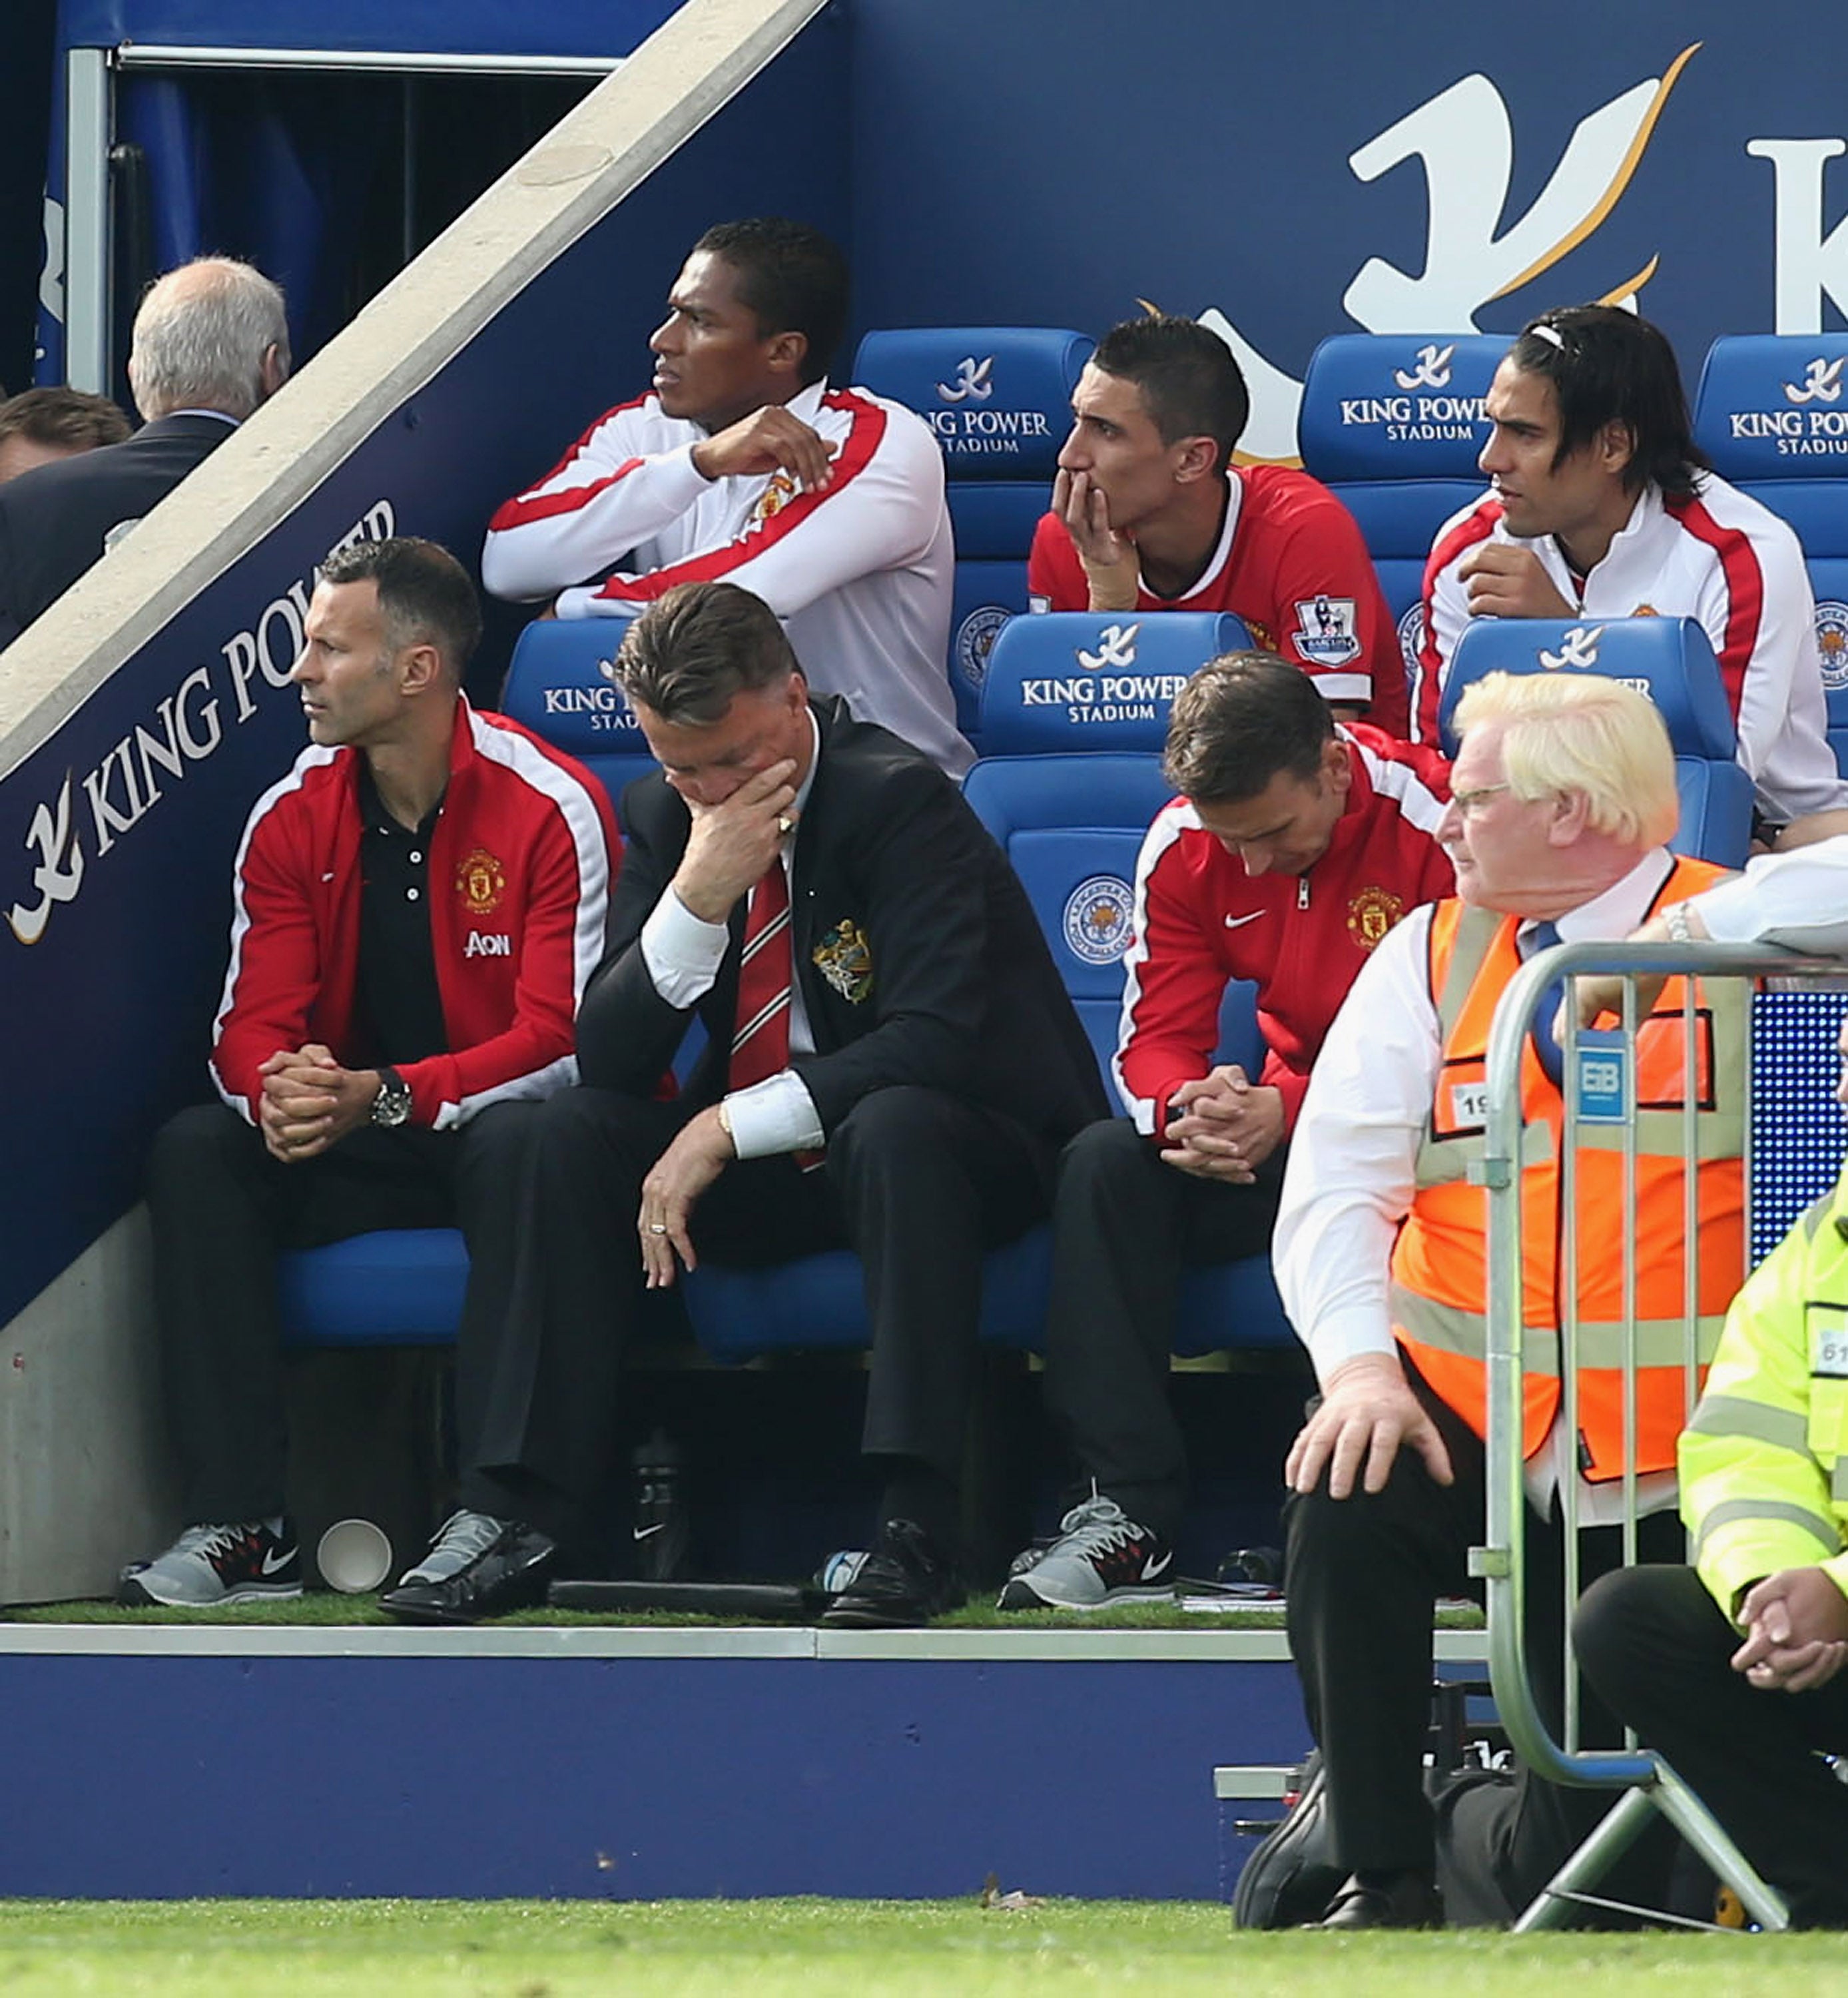 Van Gaal was dejected as United stumbled defensively in the second half